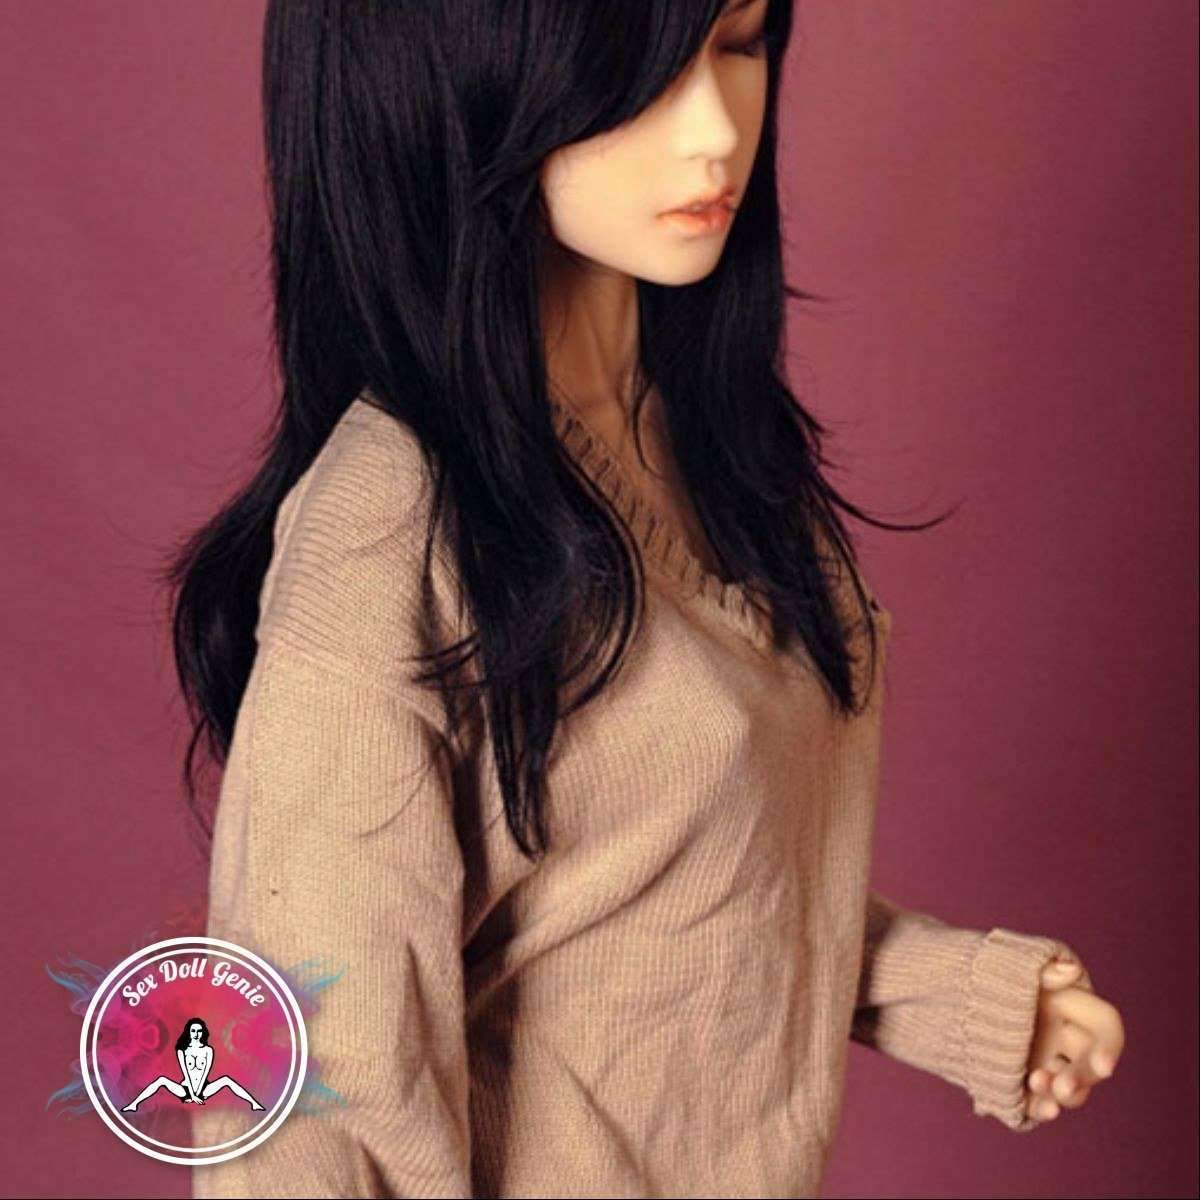 DS Doll - 163 - KaylaCE Head - Type 1 D Cup Silicone Doll-10